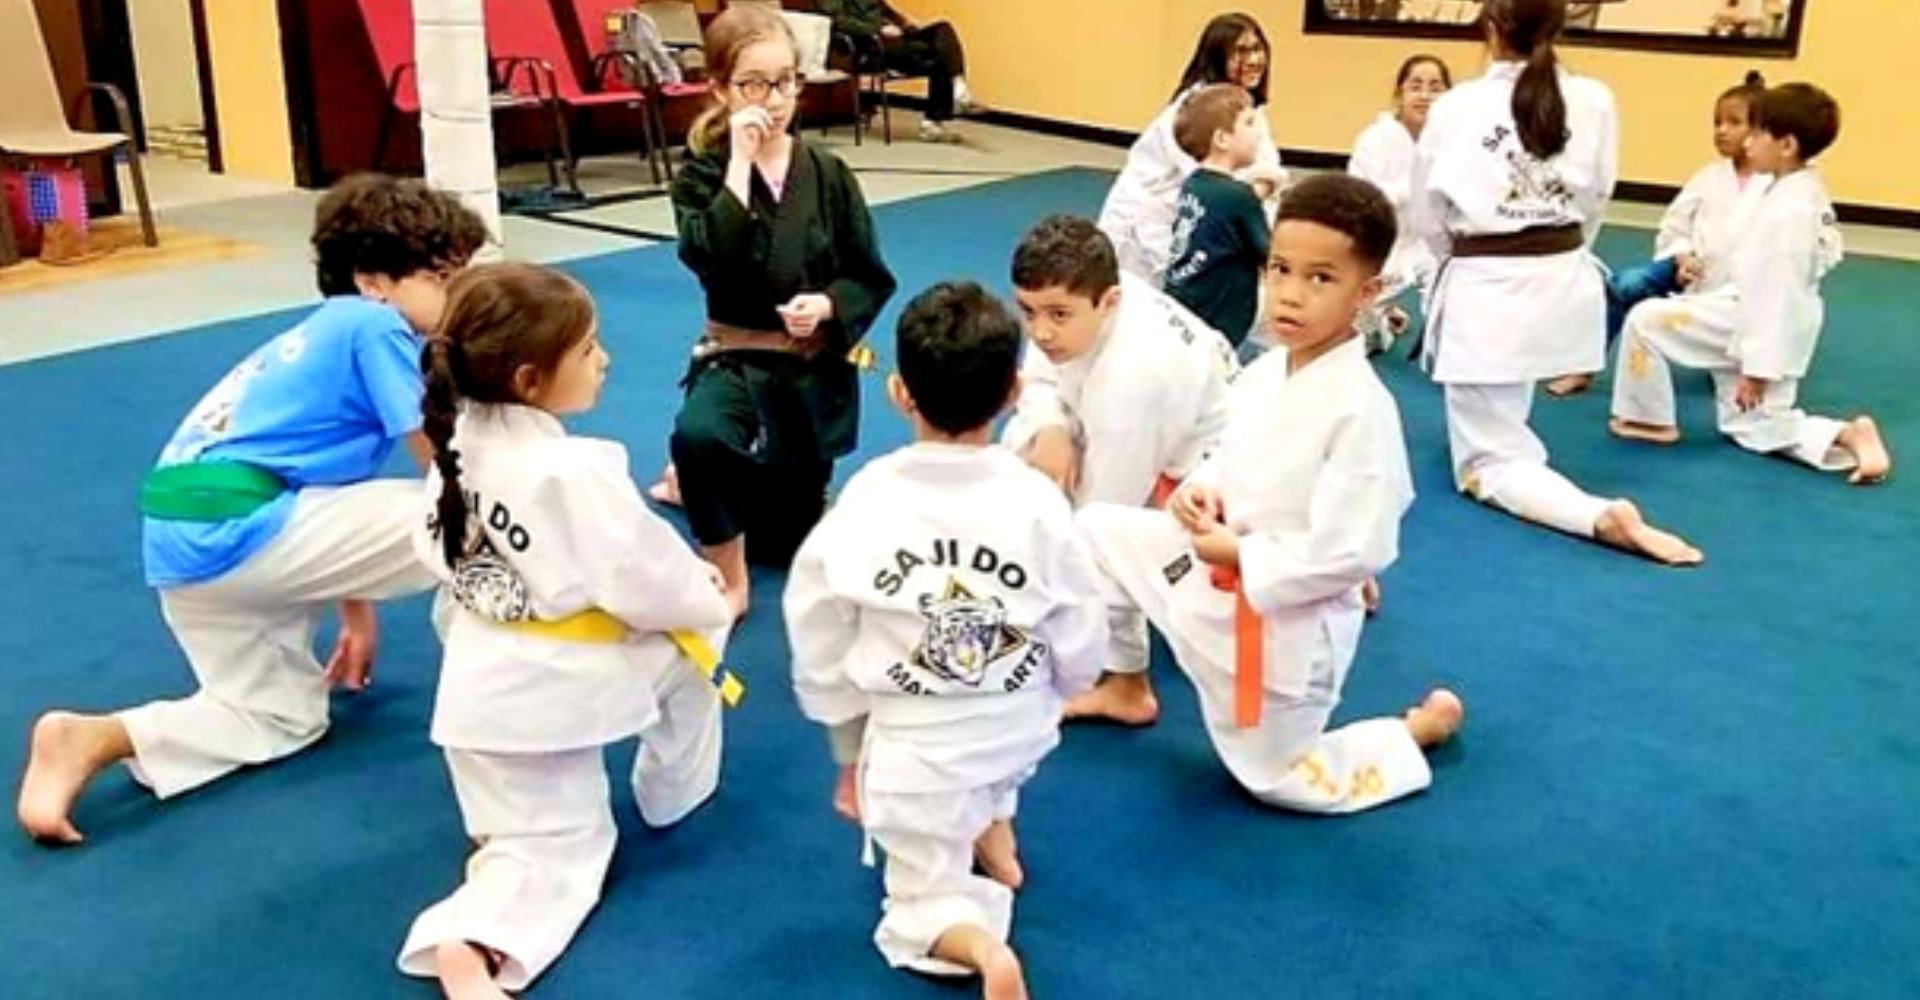 Team Nogueira Dubai - Hey guys, here is our updated schedule. Our kids  programs are back on track! We have now added Karate for our 5-10 year  olds. Also, there is a